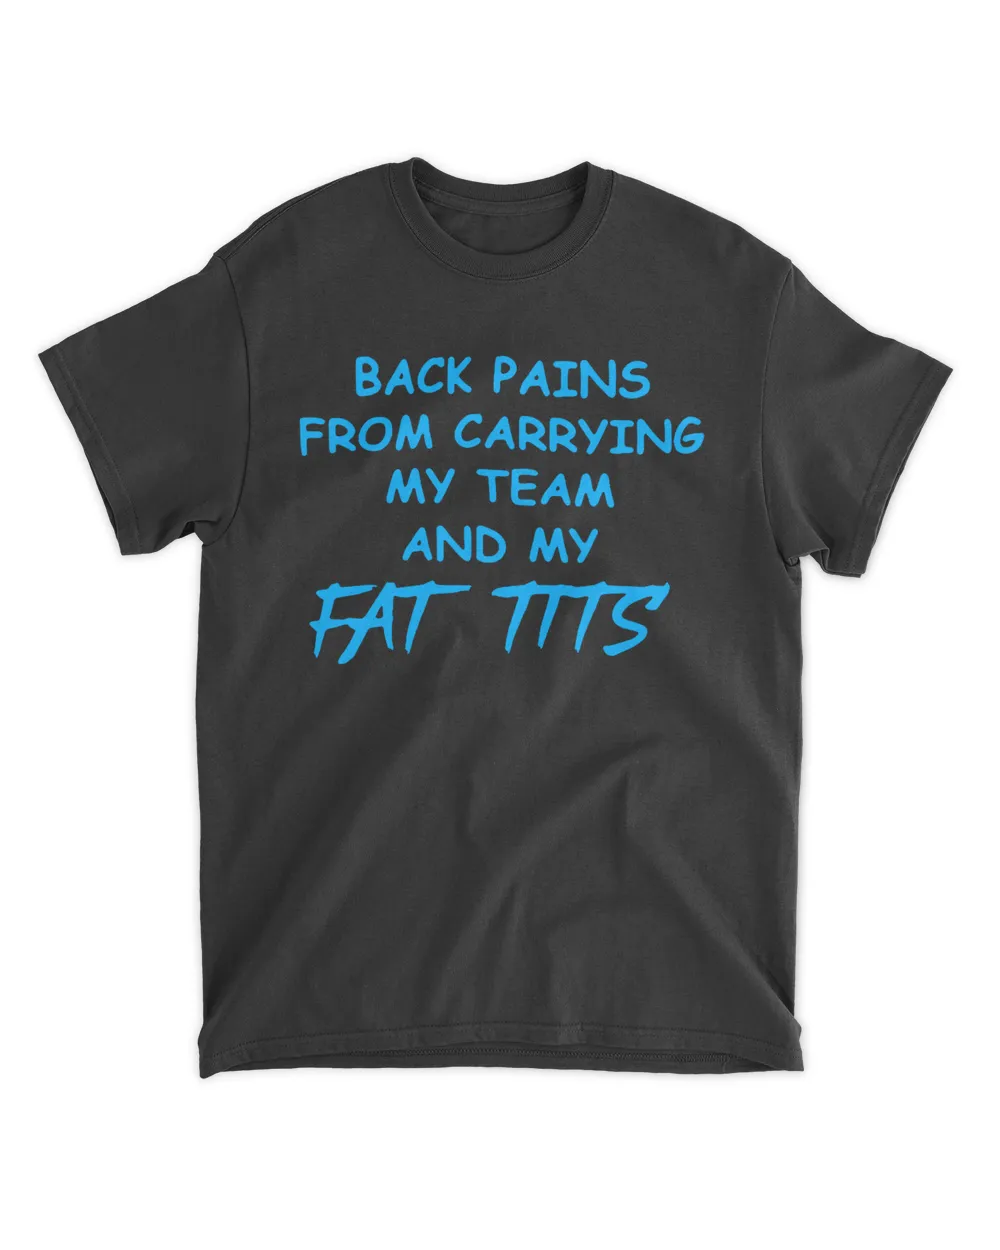 Back pains from carrying my team and my fat tits funny T-shirt